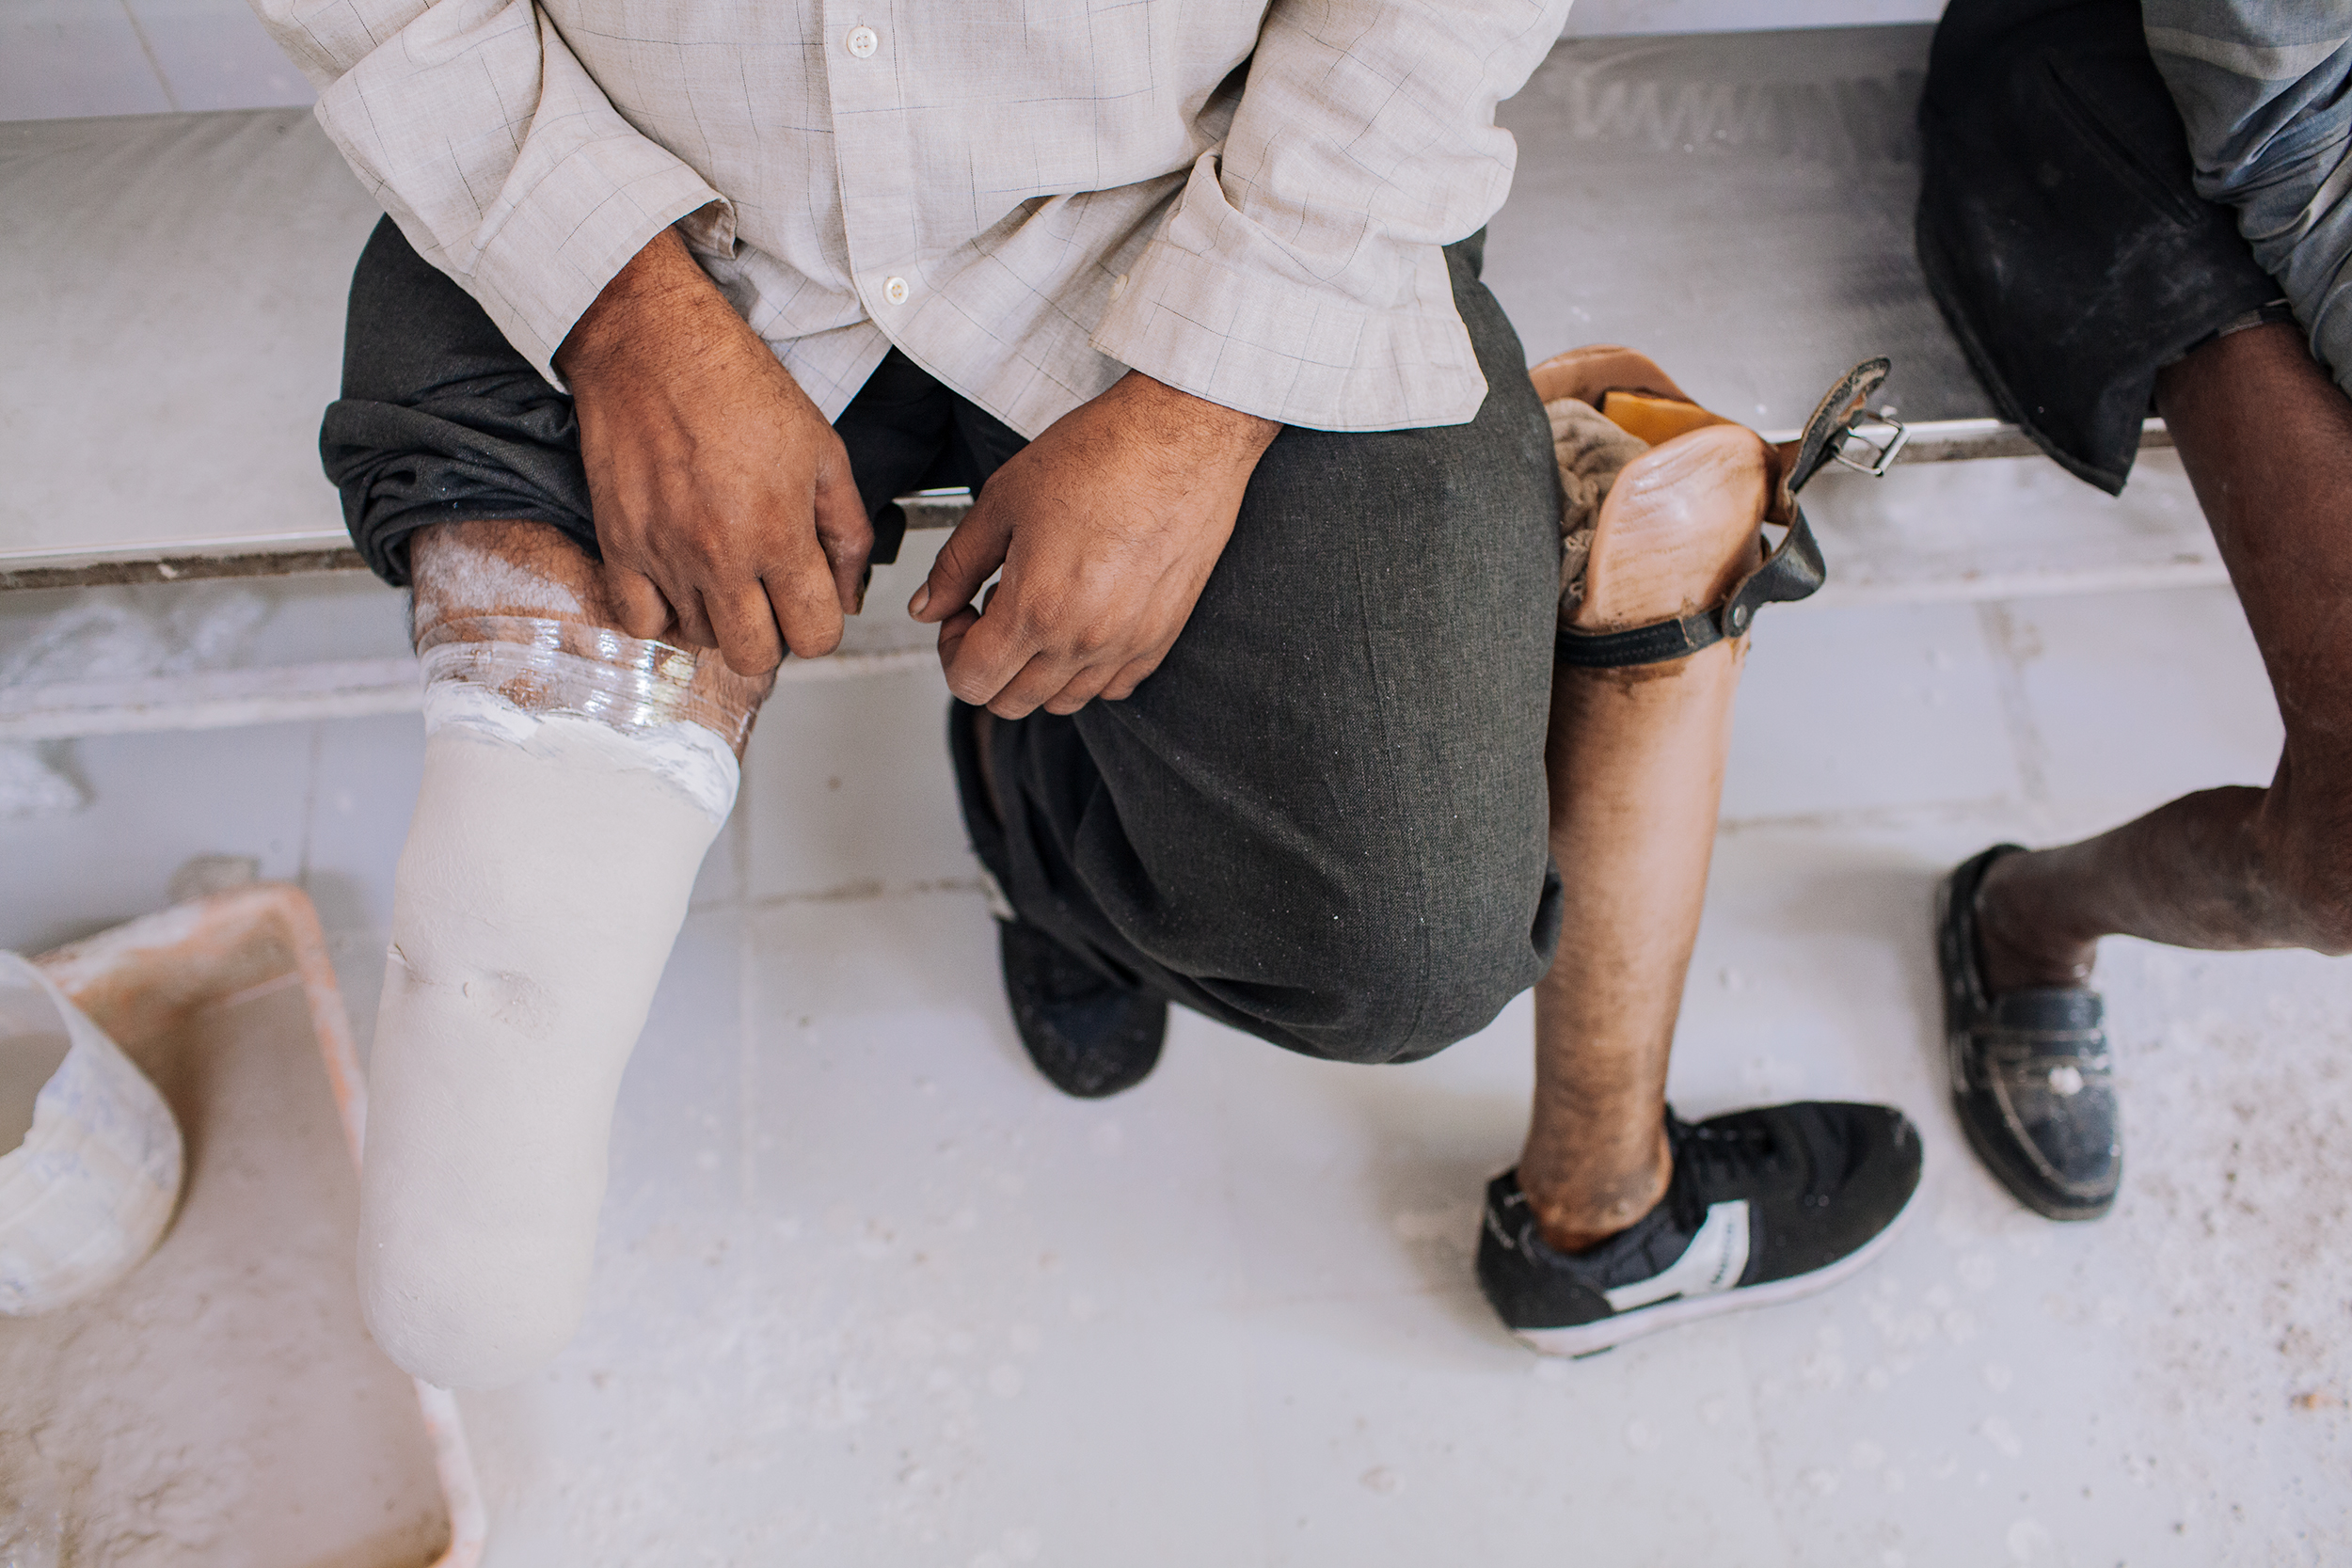  A negative mold of patient’s limb is being made to customize his prosthesis. 